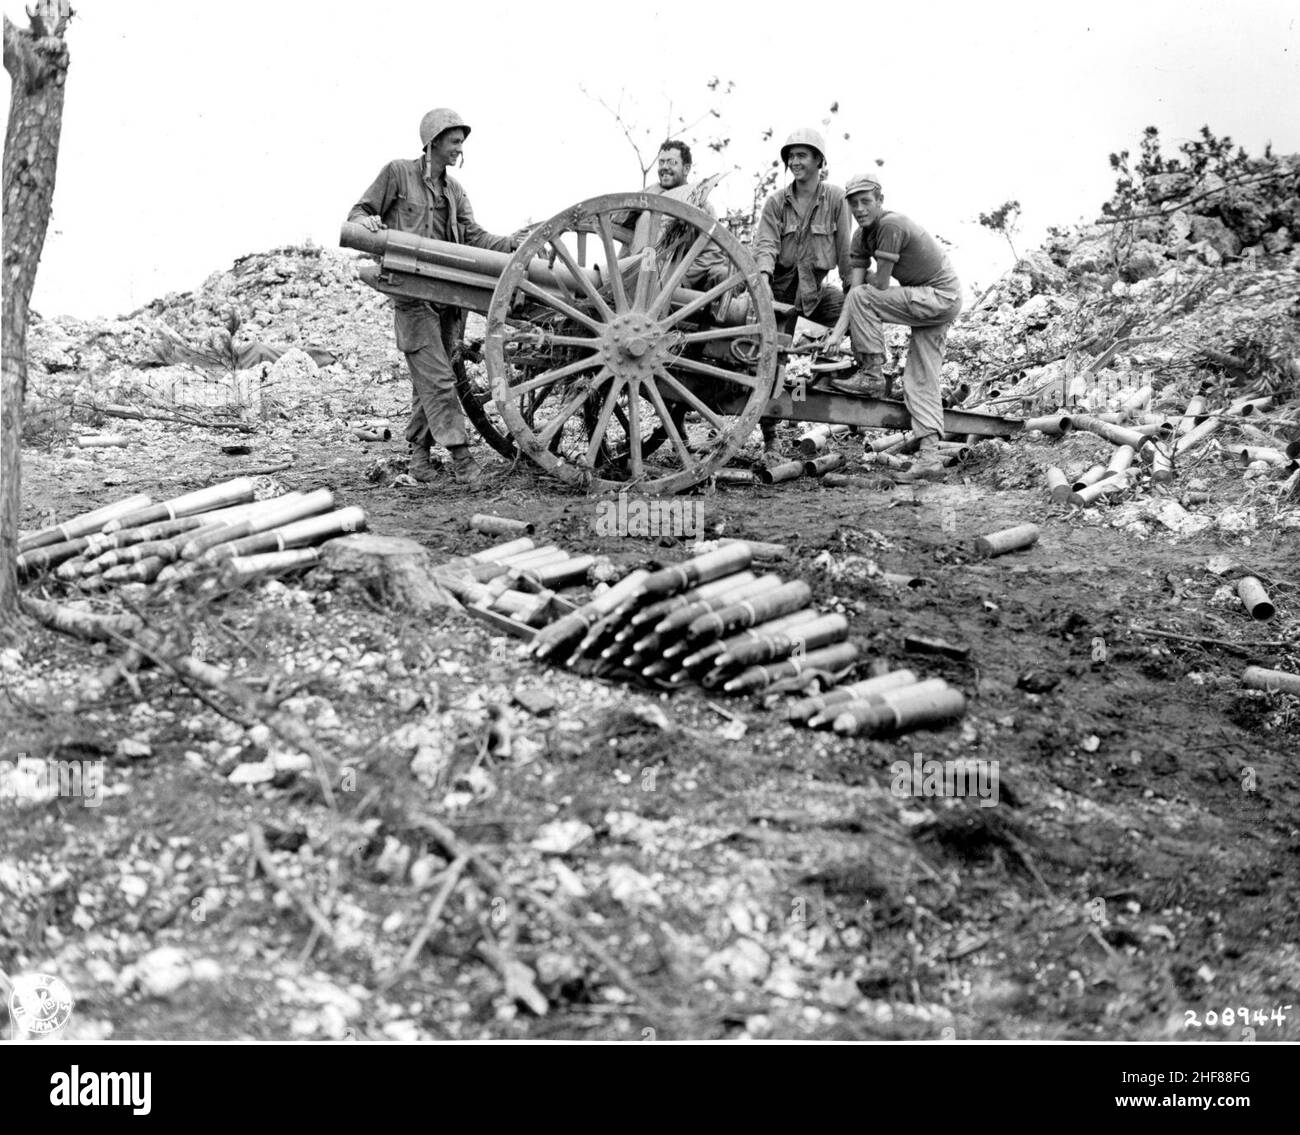 SC 208944 - Men of Co. B, 184th Inf. Regt., inspect a Jap 75-mm gun they captured on Okinawa. 29 May, 1945. Stock Photo